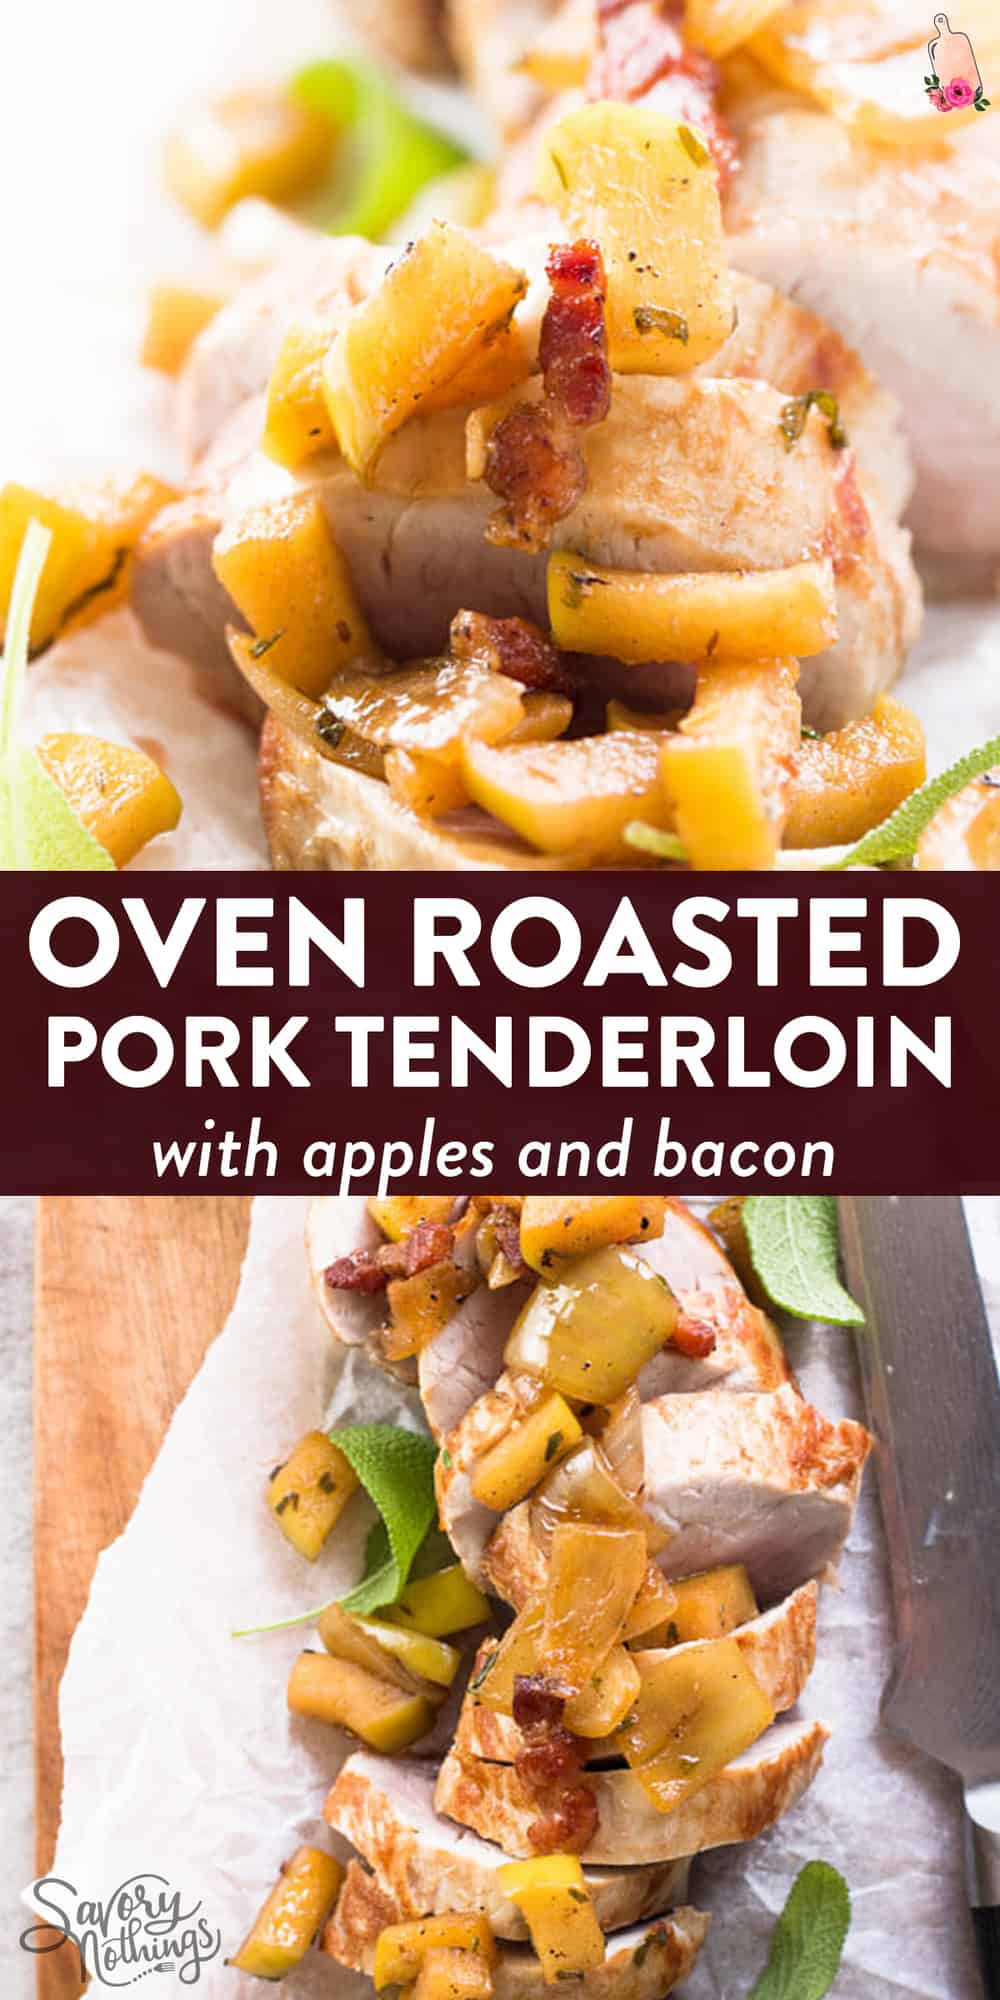 Oven Roasted Pork Tenderloin with Apples and Bacon - Savory Nothings